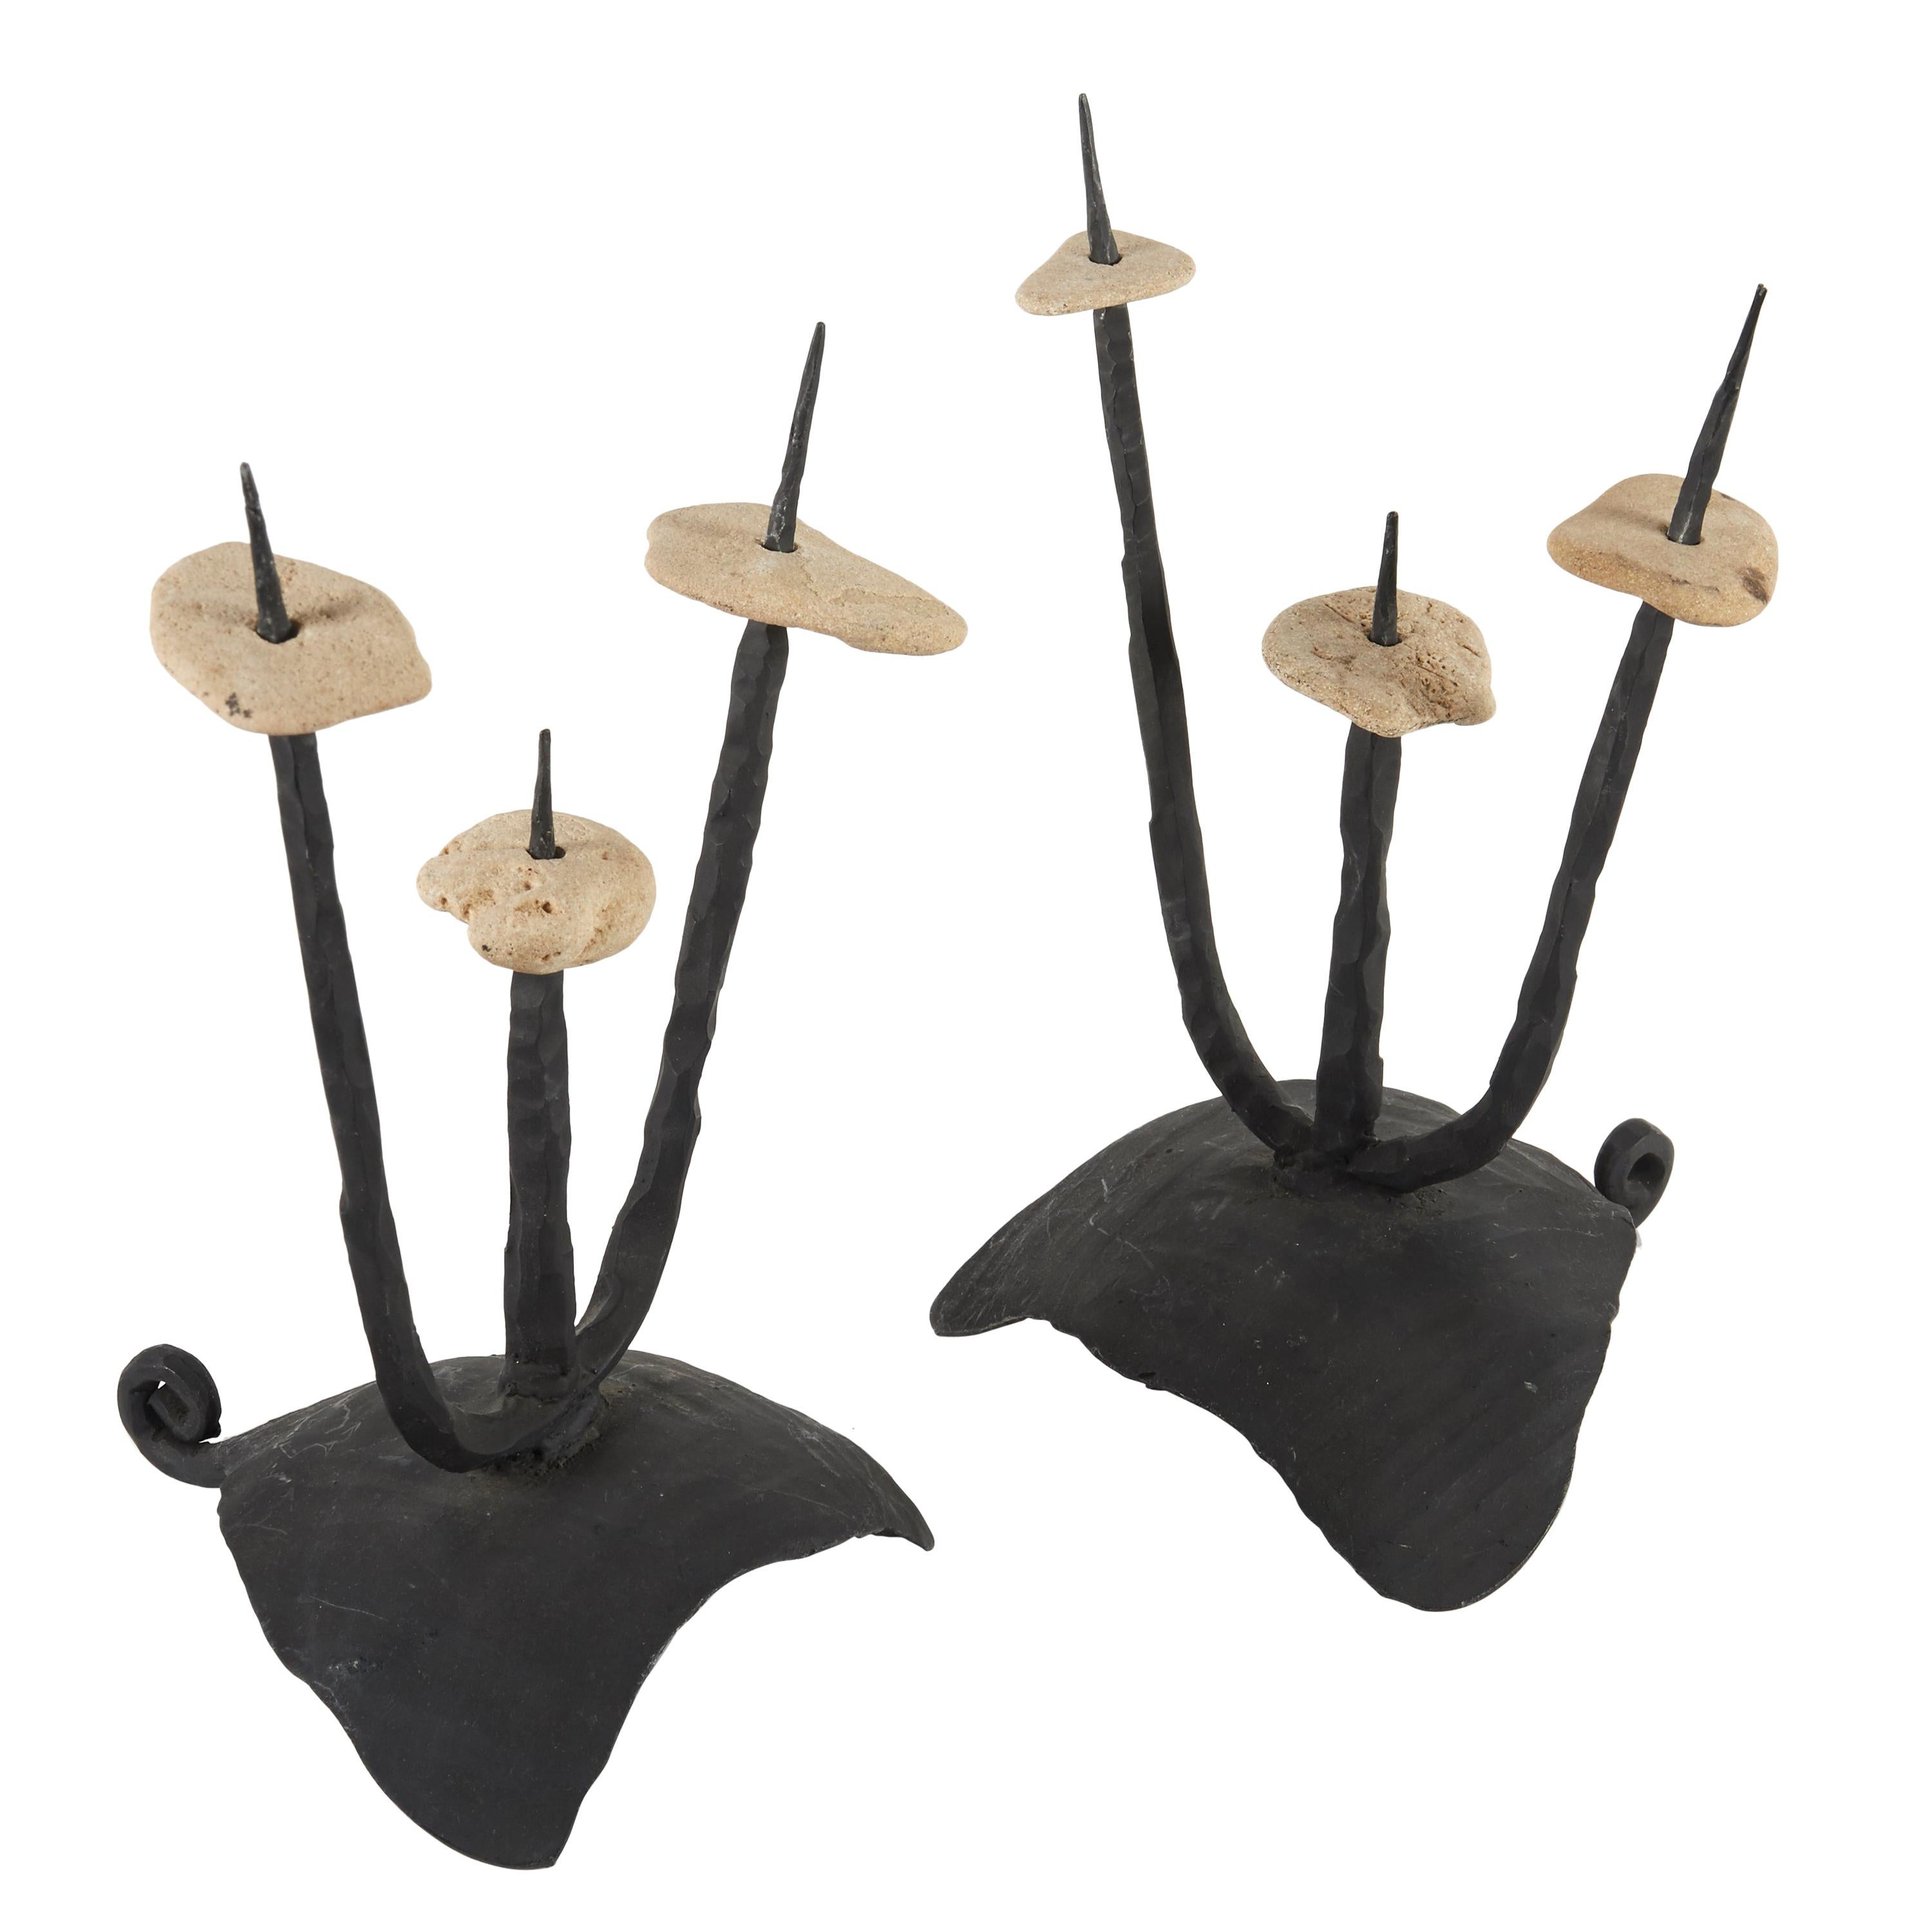 Mid-20th Century Pair of Brutalist Candleholders/Sculptures by David Palombo